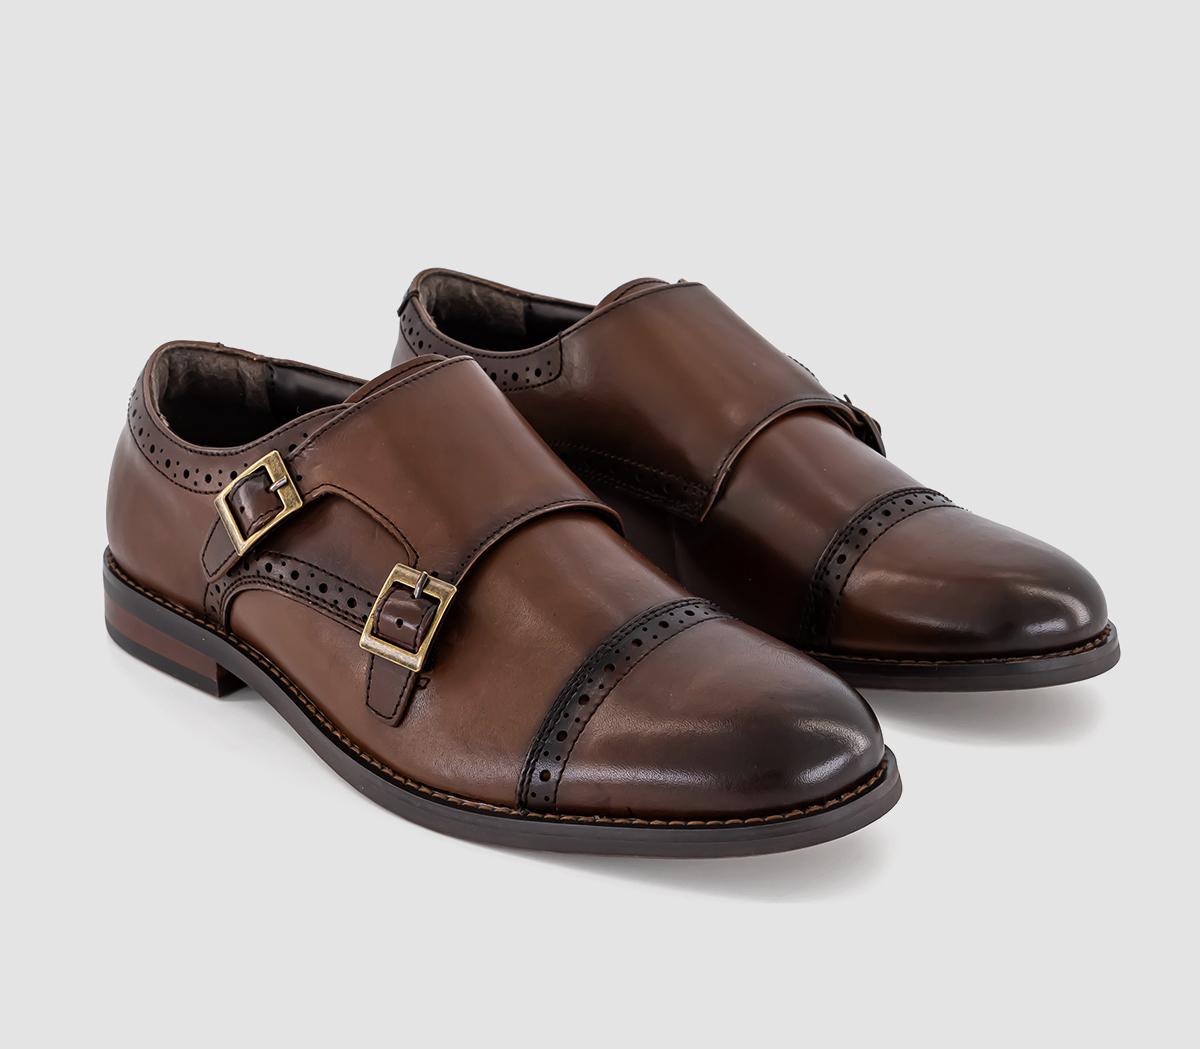 OFFICE Mens Myles Double Strap Monk Shoes Brown Leather, 9